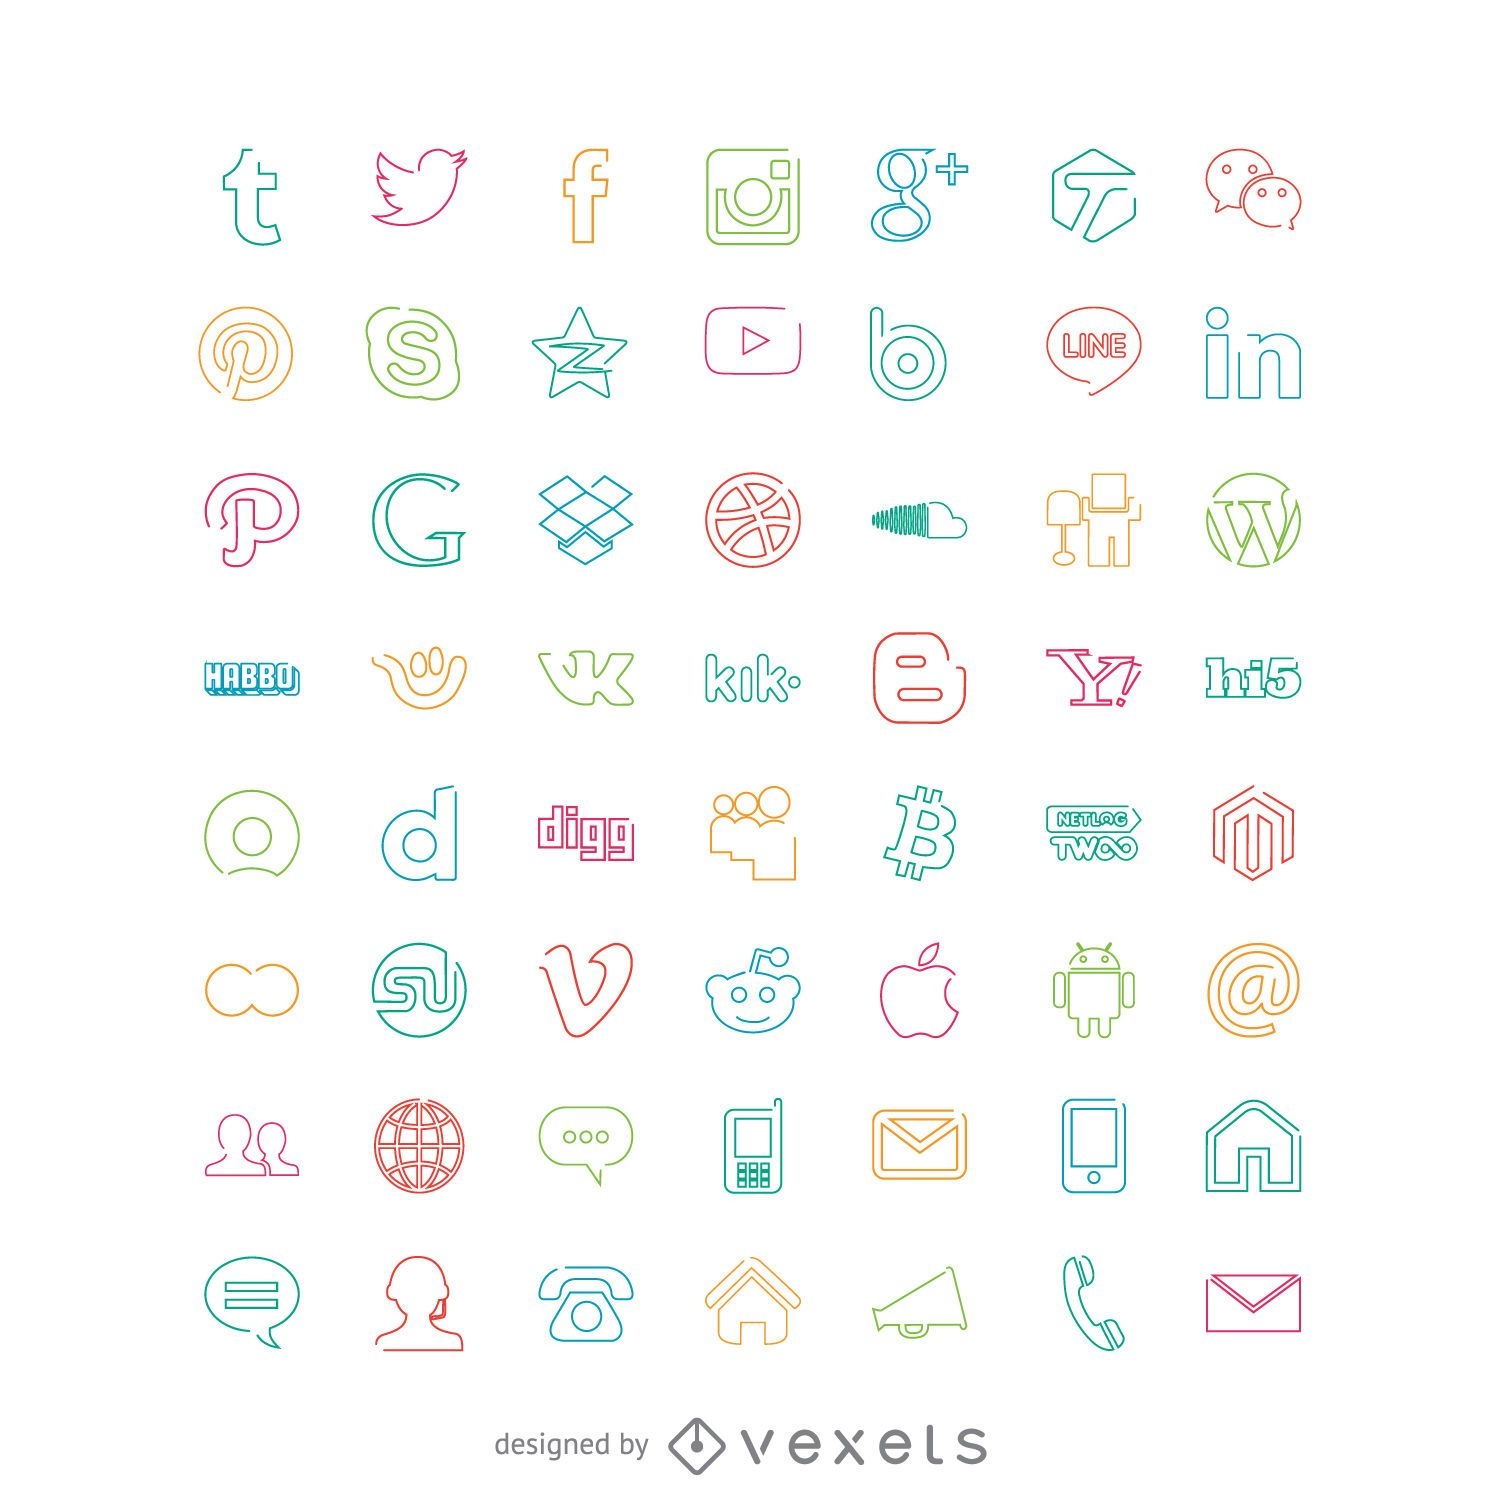 Social icons set in bright colors